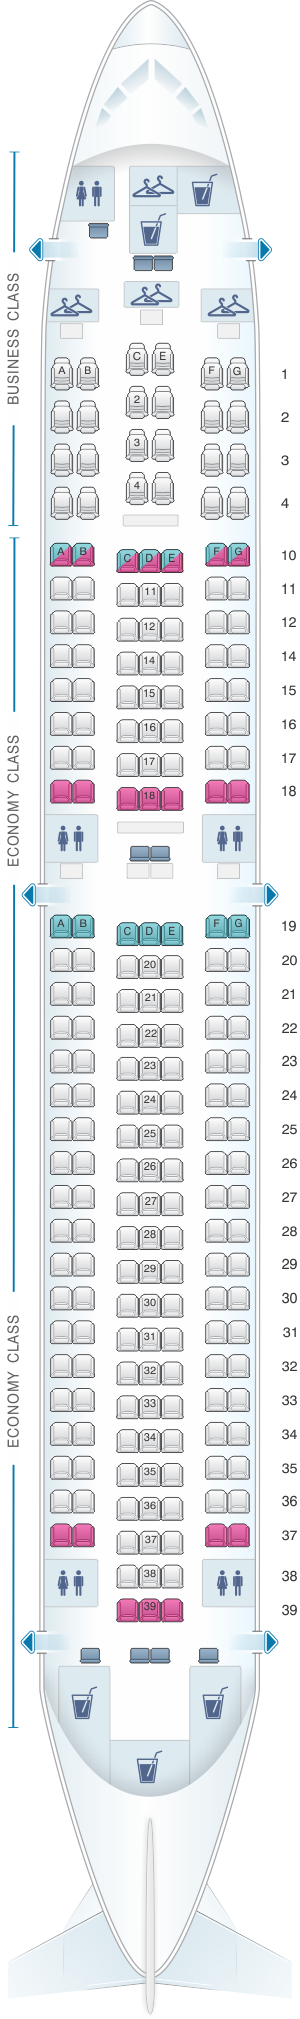 Seat map for Transaero Airlines Boeing B767 200 Config. 1